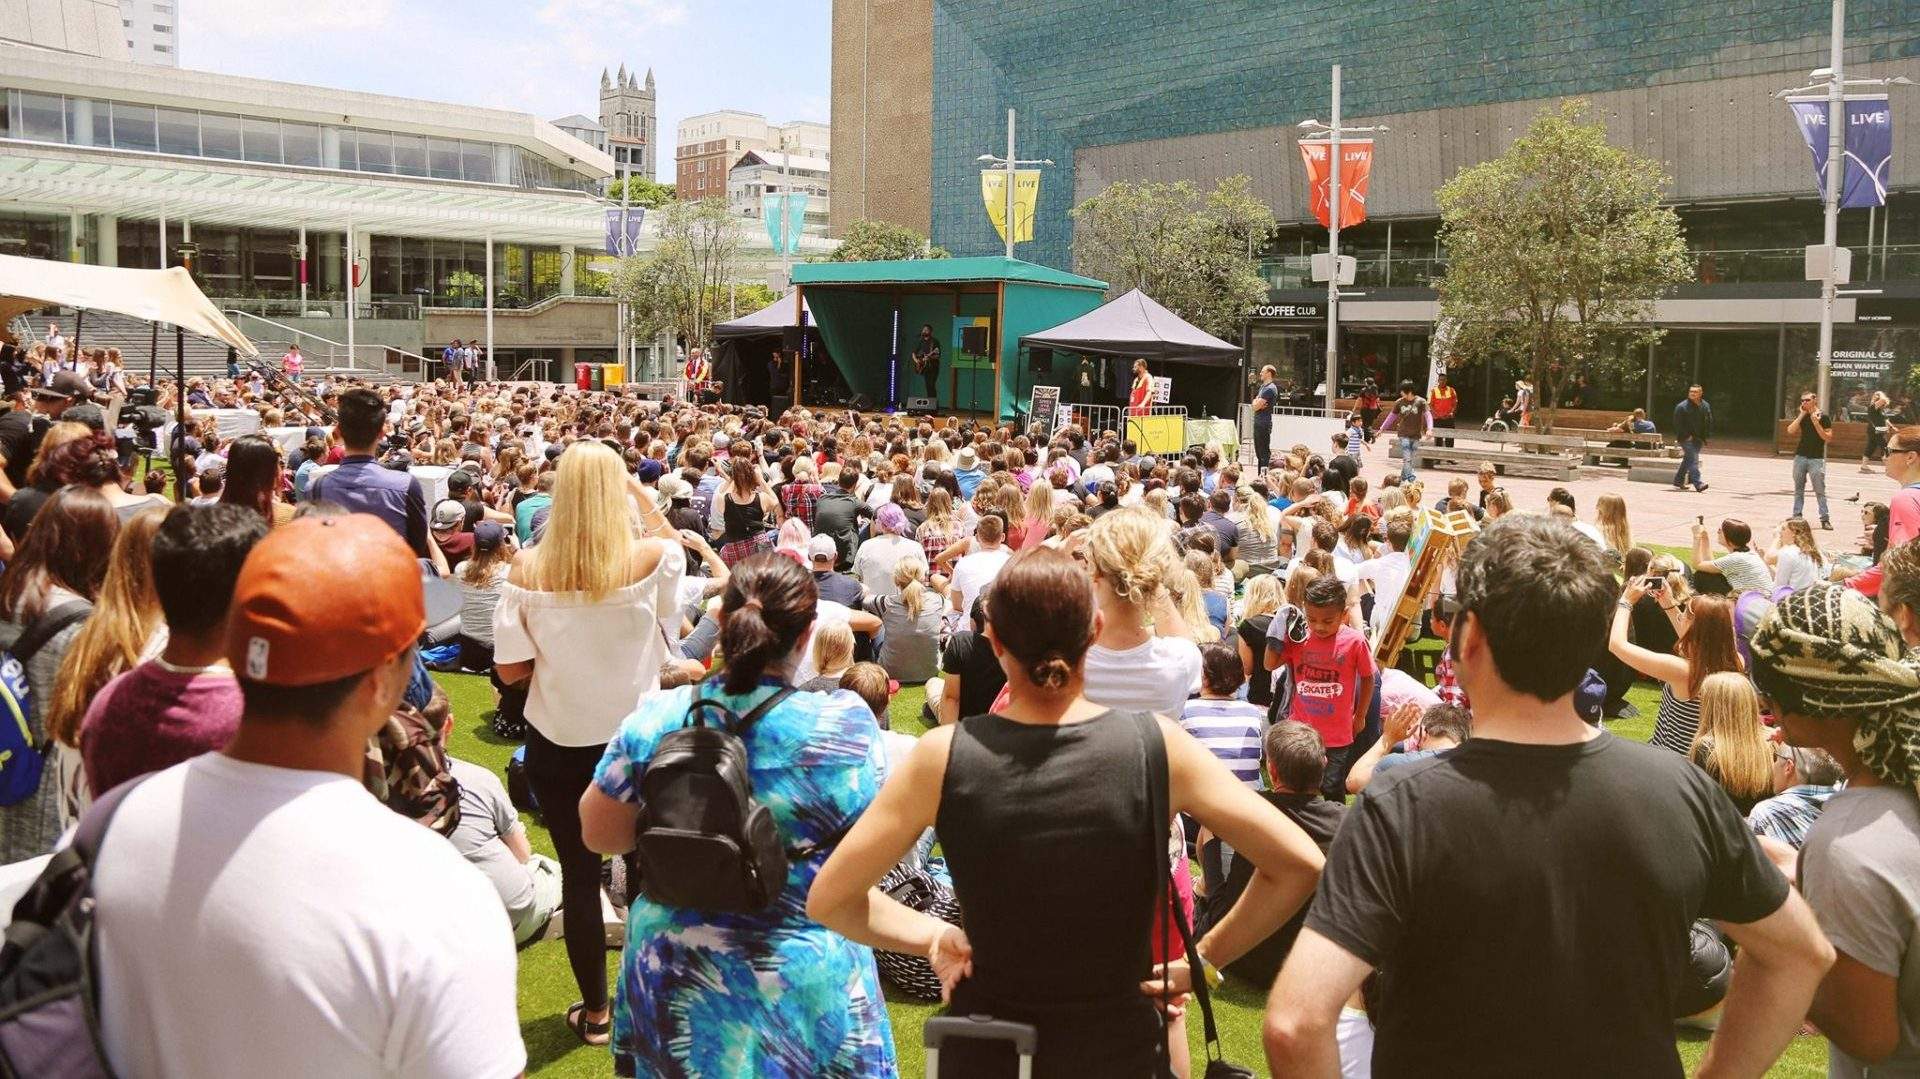 Auckland Live's Free Outdoor Entertainment Series Is Back for Summer